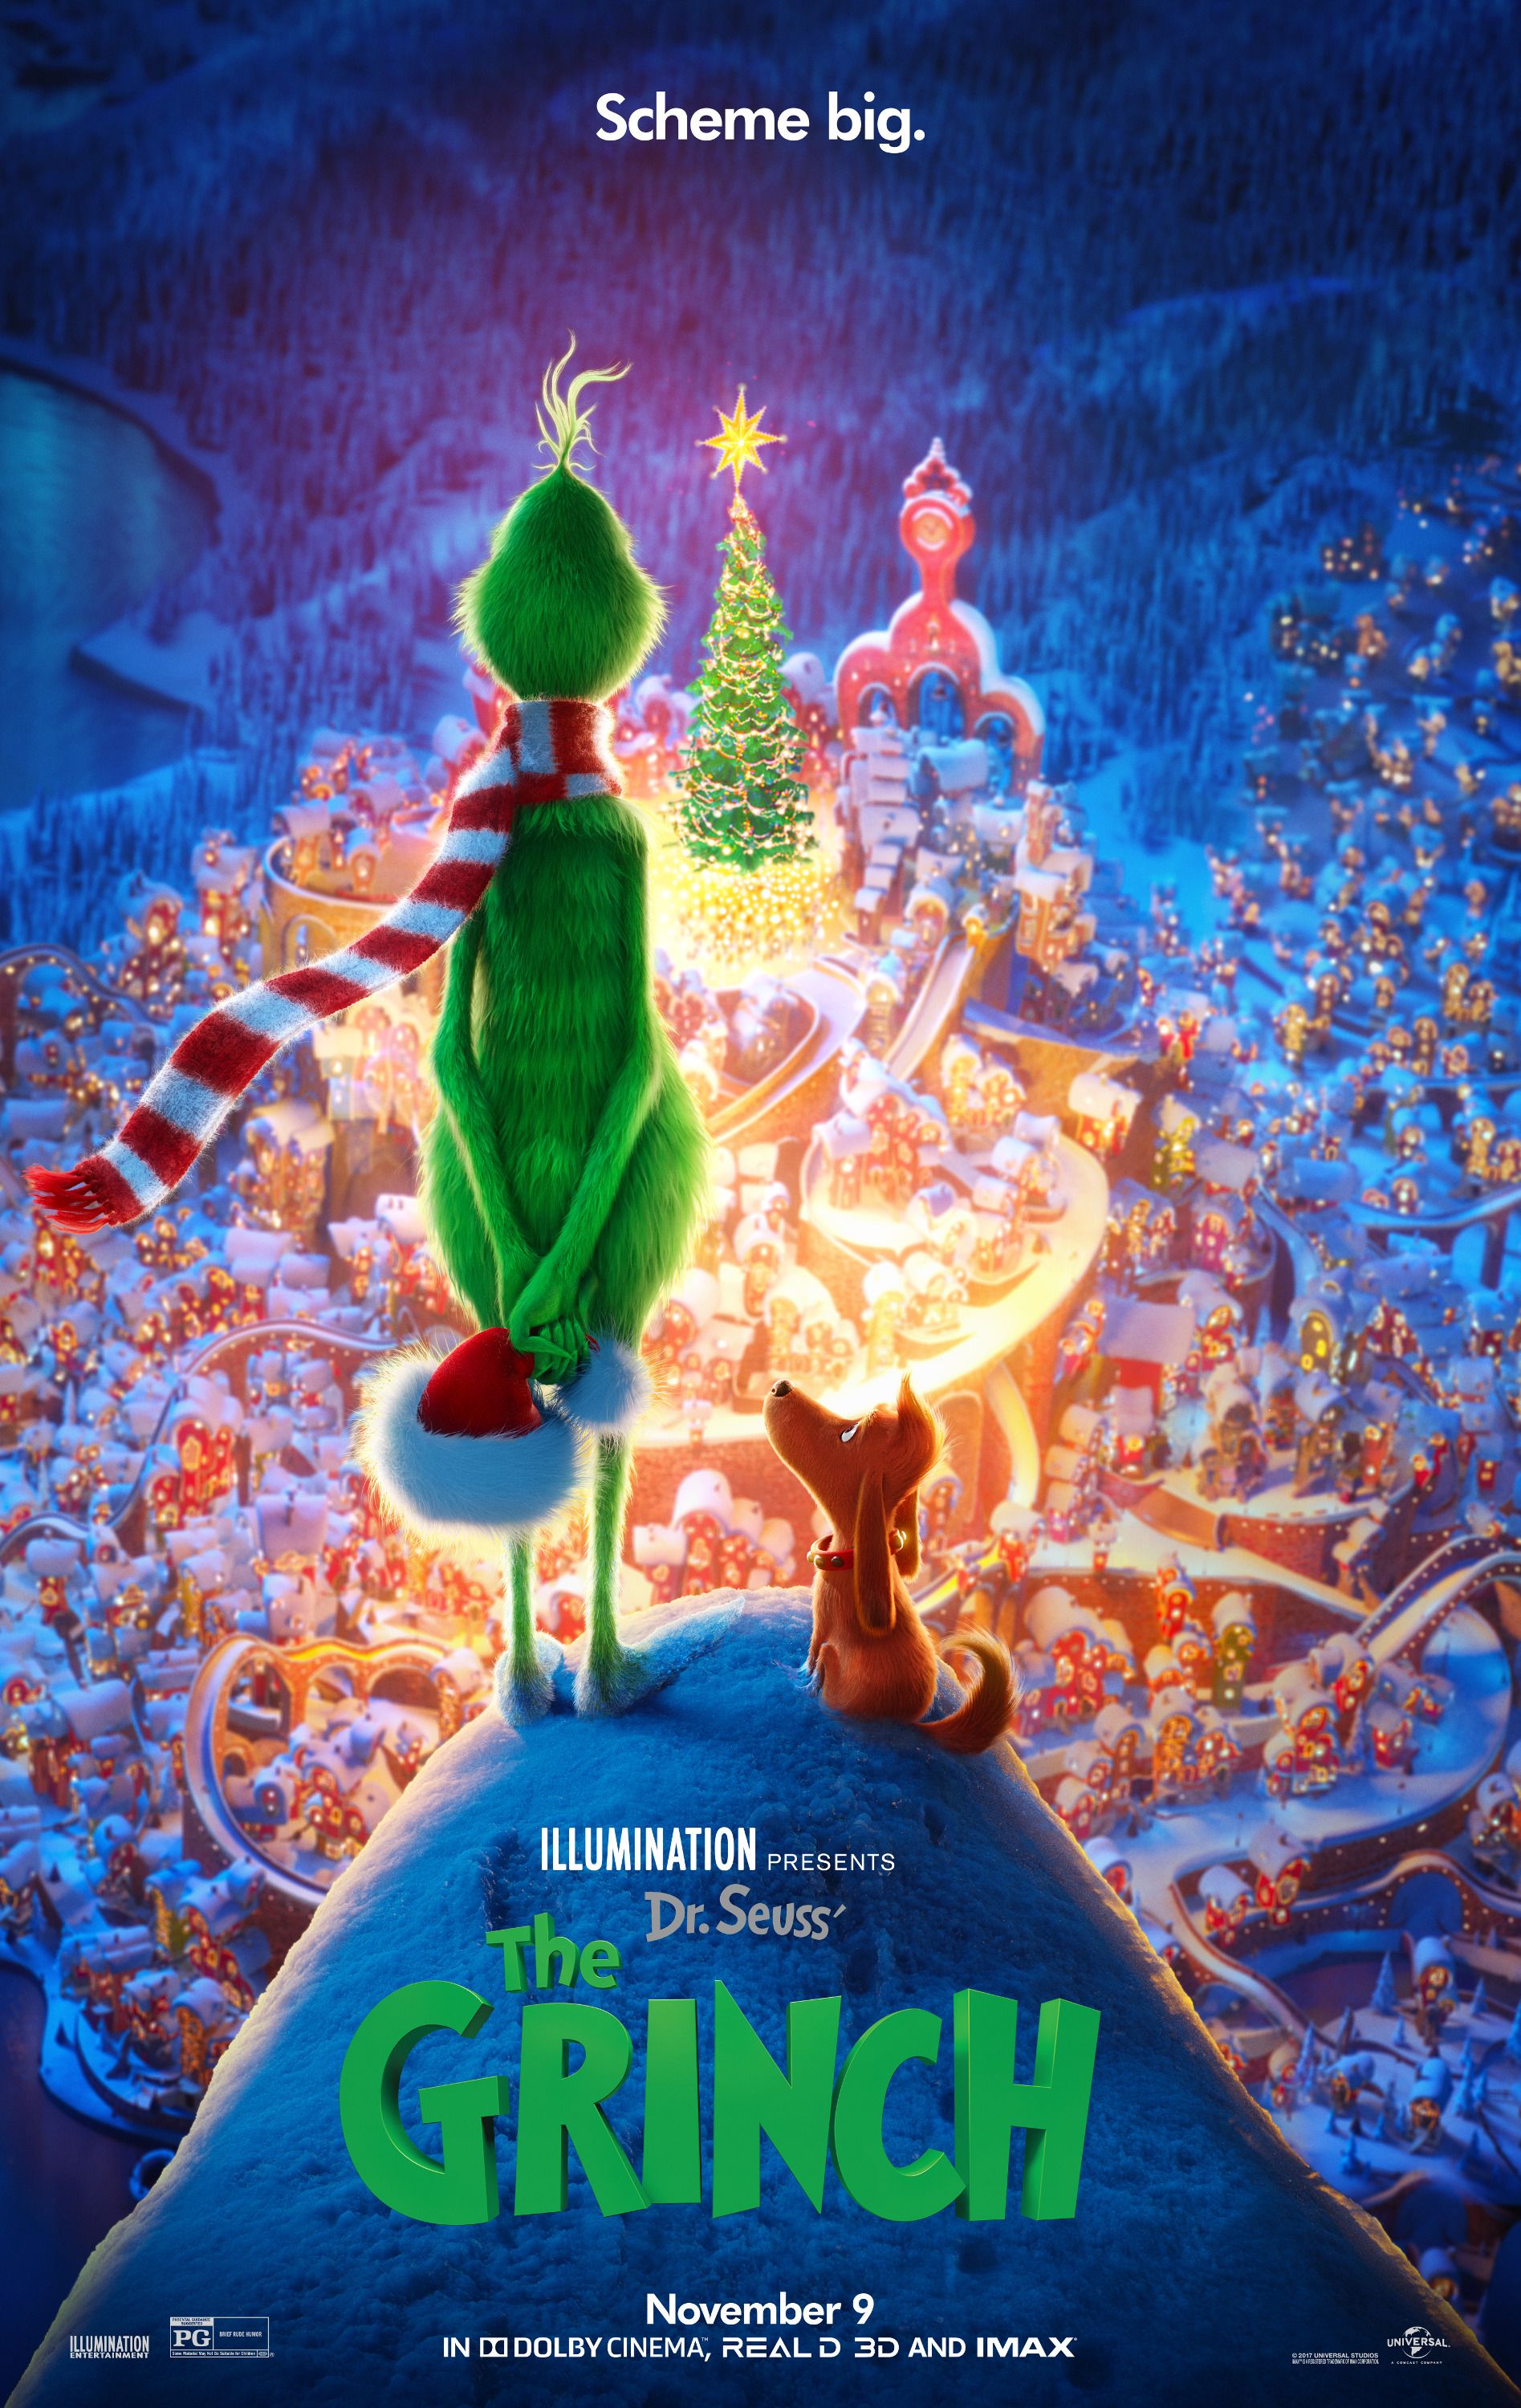 The Grinch 2018 movie poster